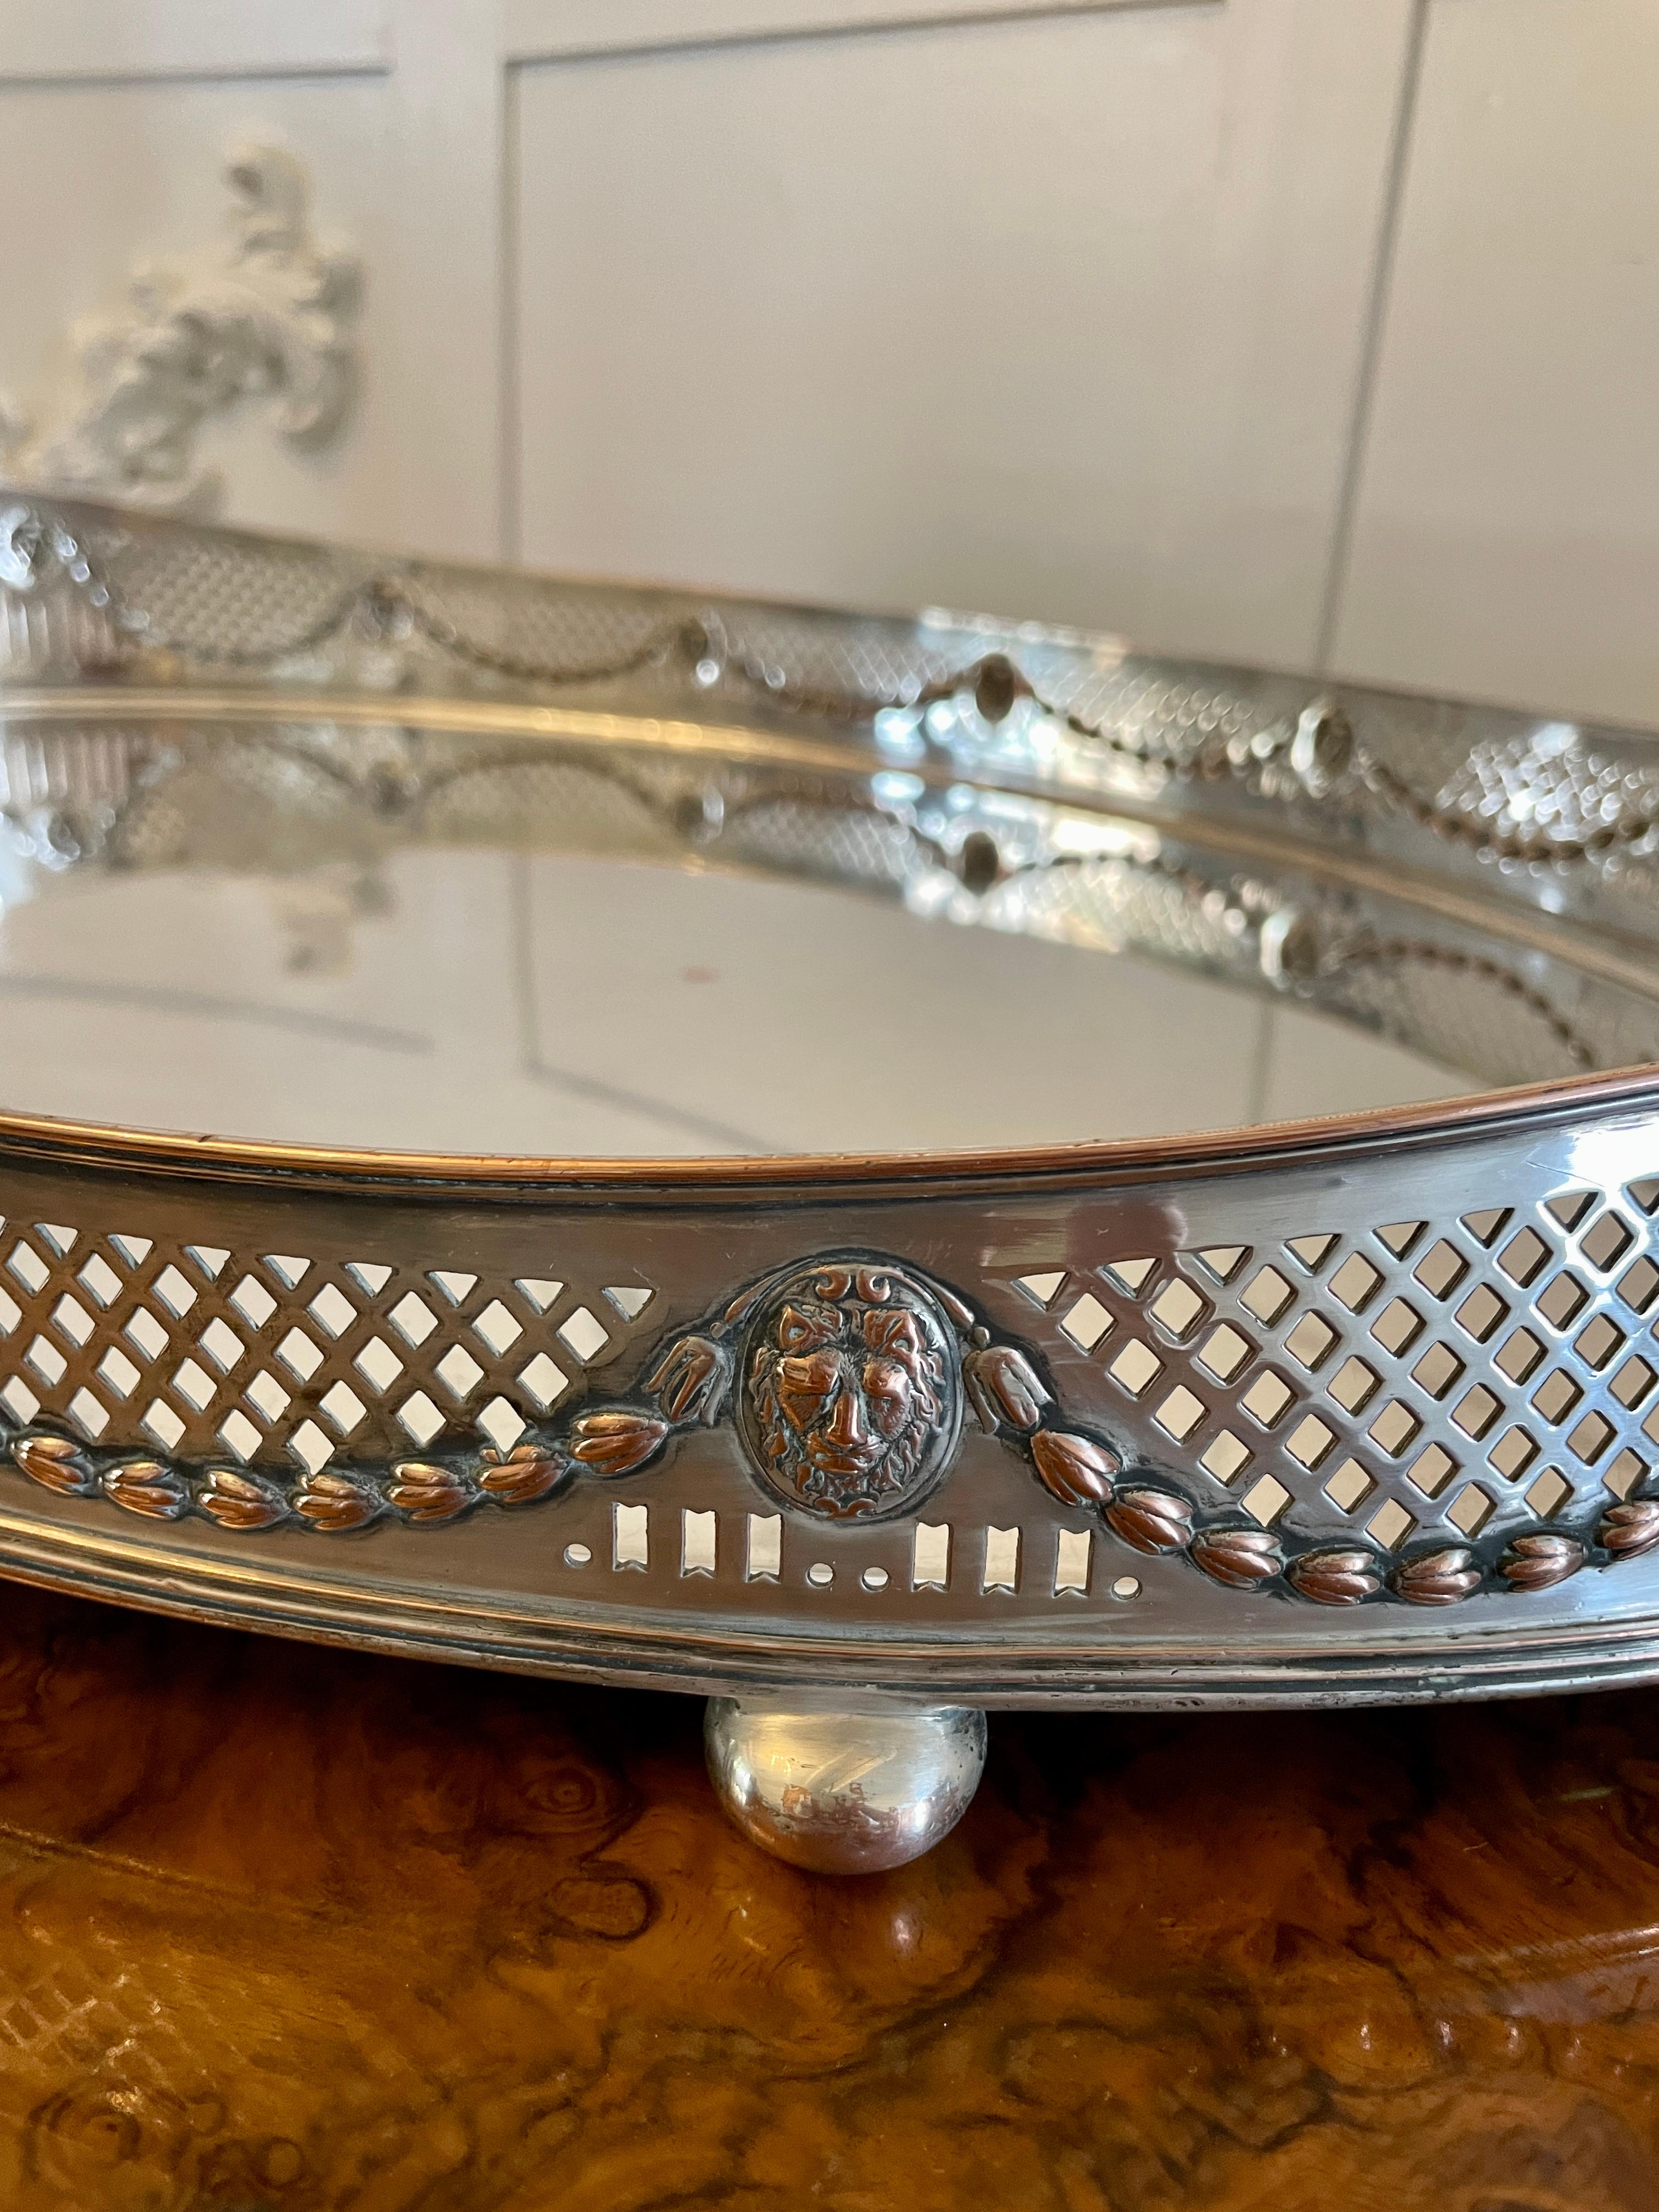  Large Antique Edwardian Quality Silver Plated Oval Shaped Tea Tray  For Sale 1